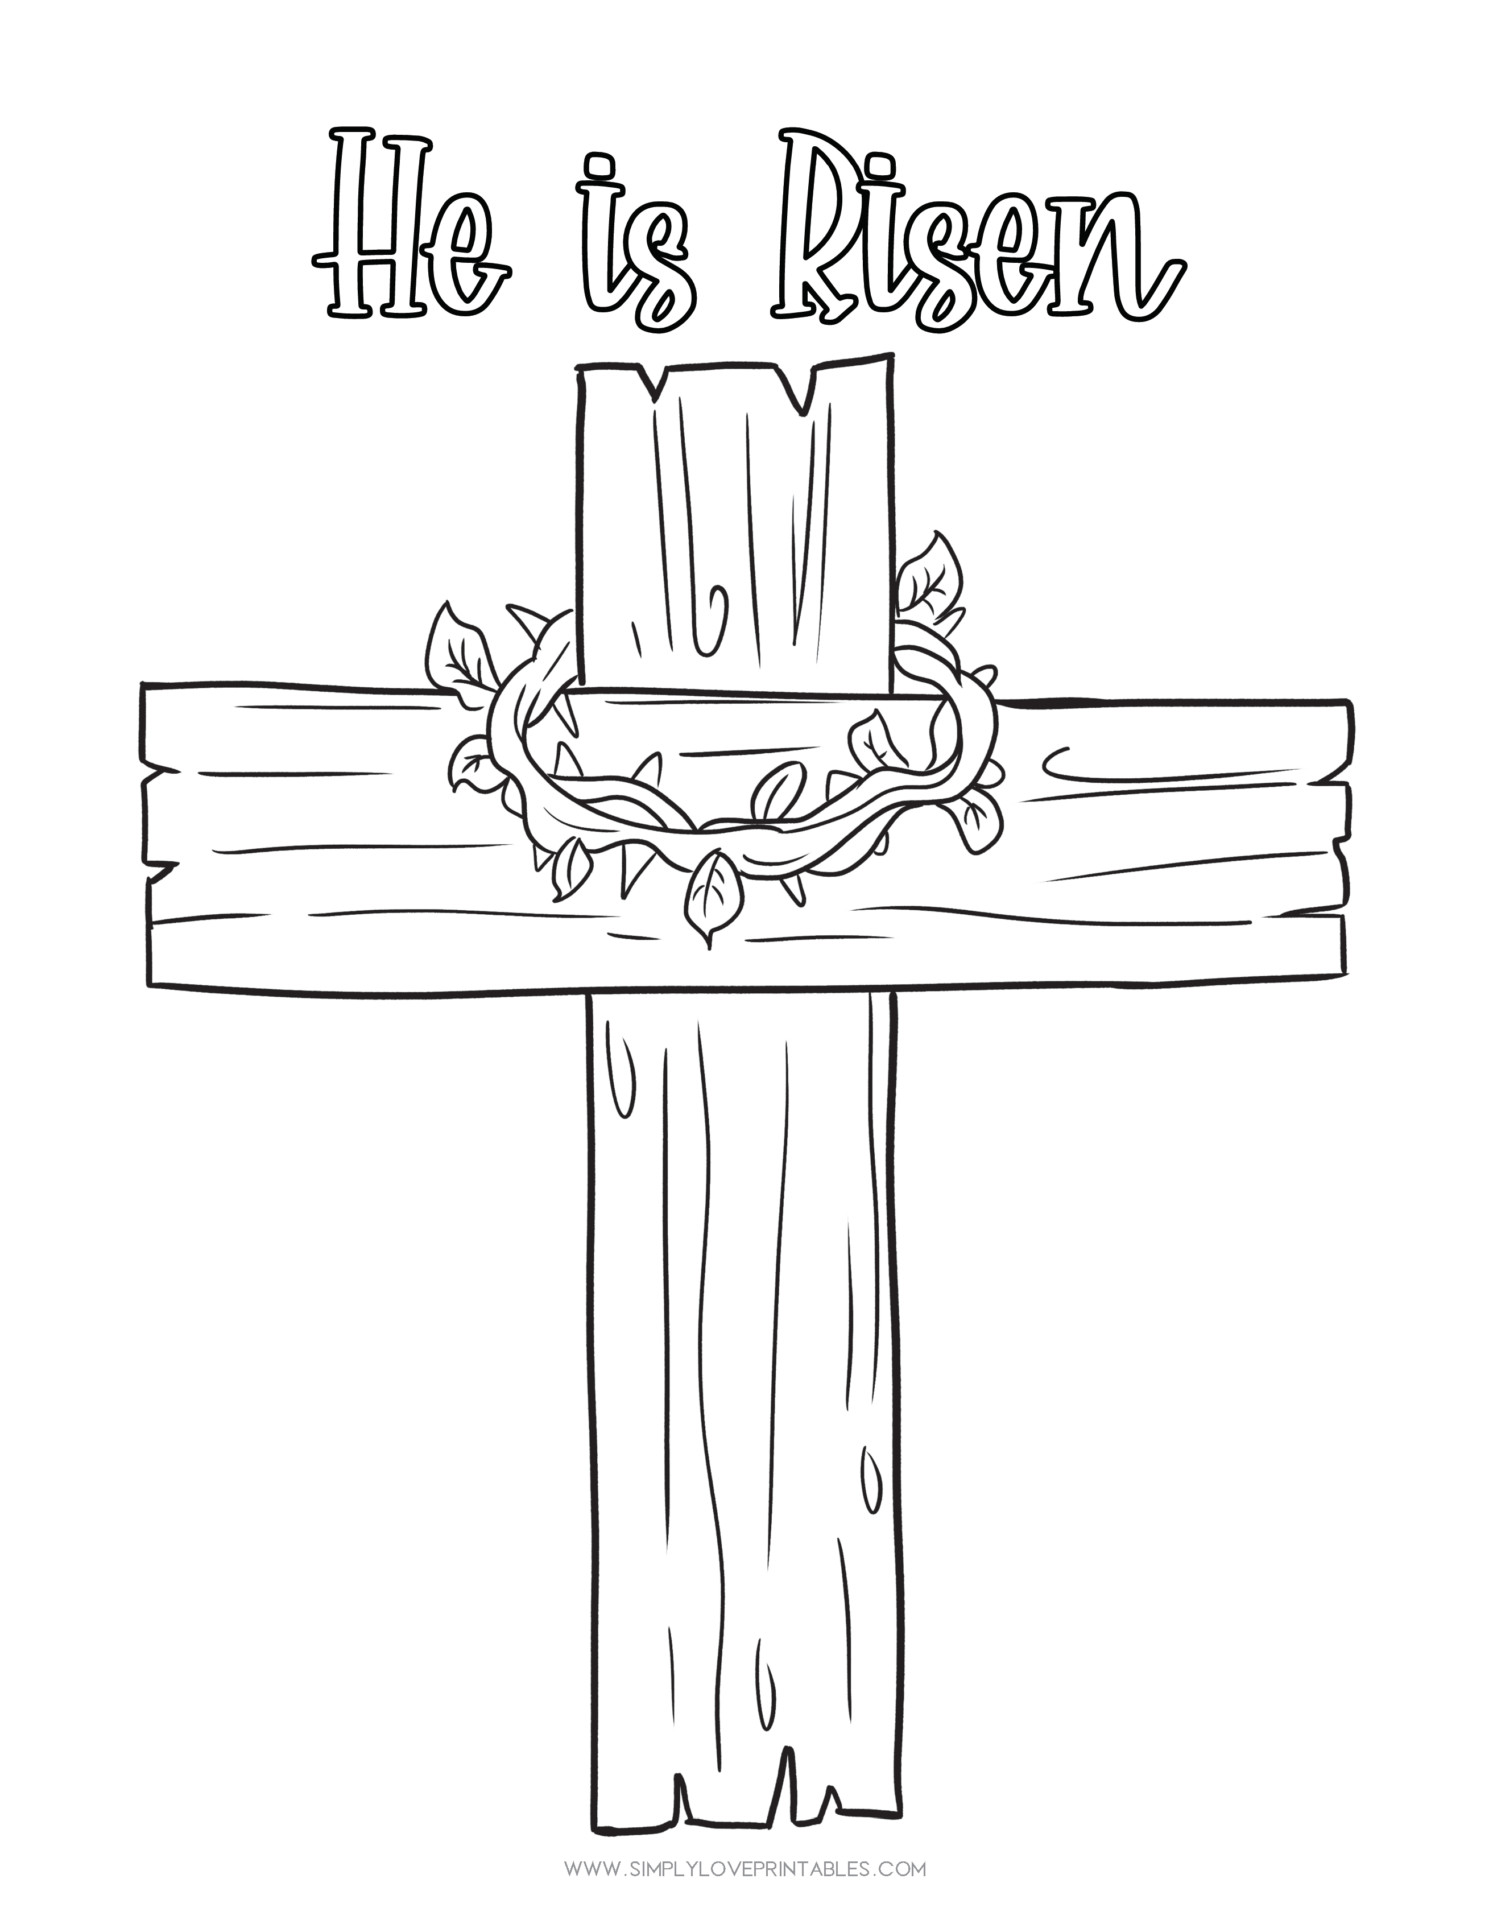 Free printable easter story coloring pages